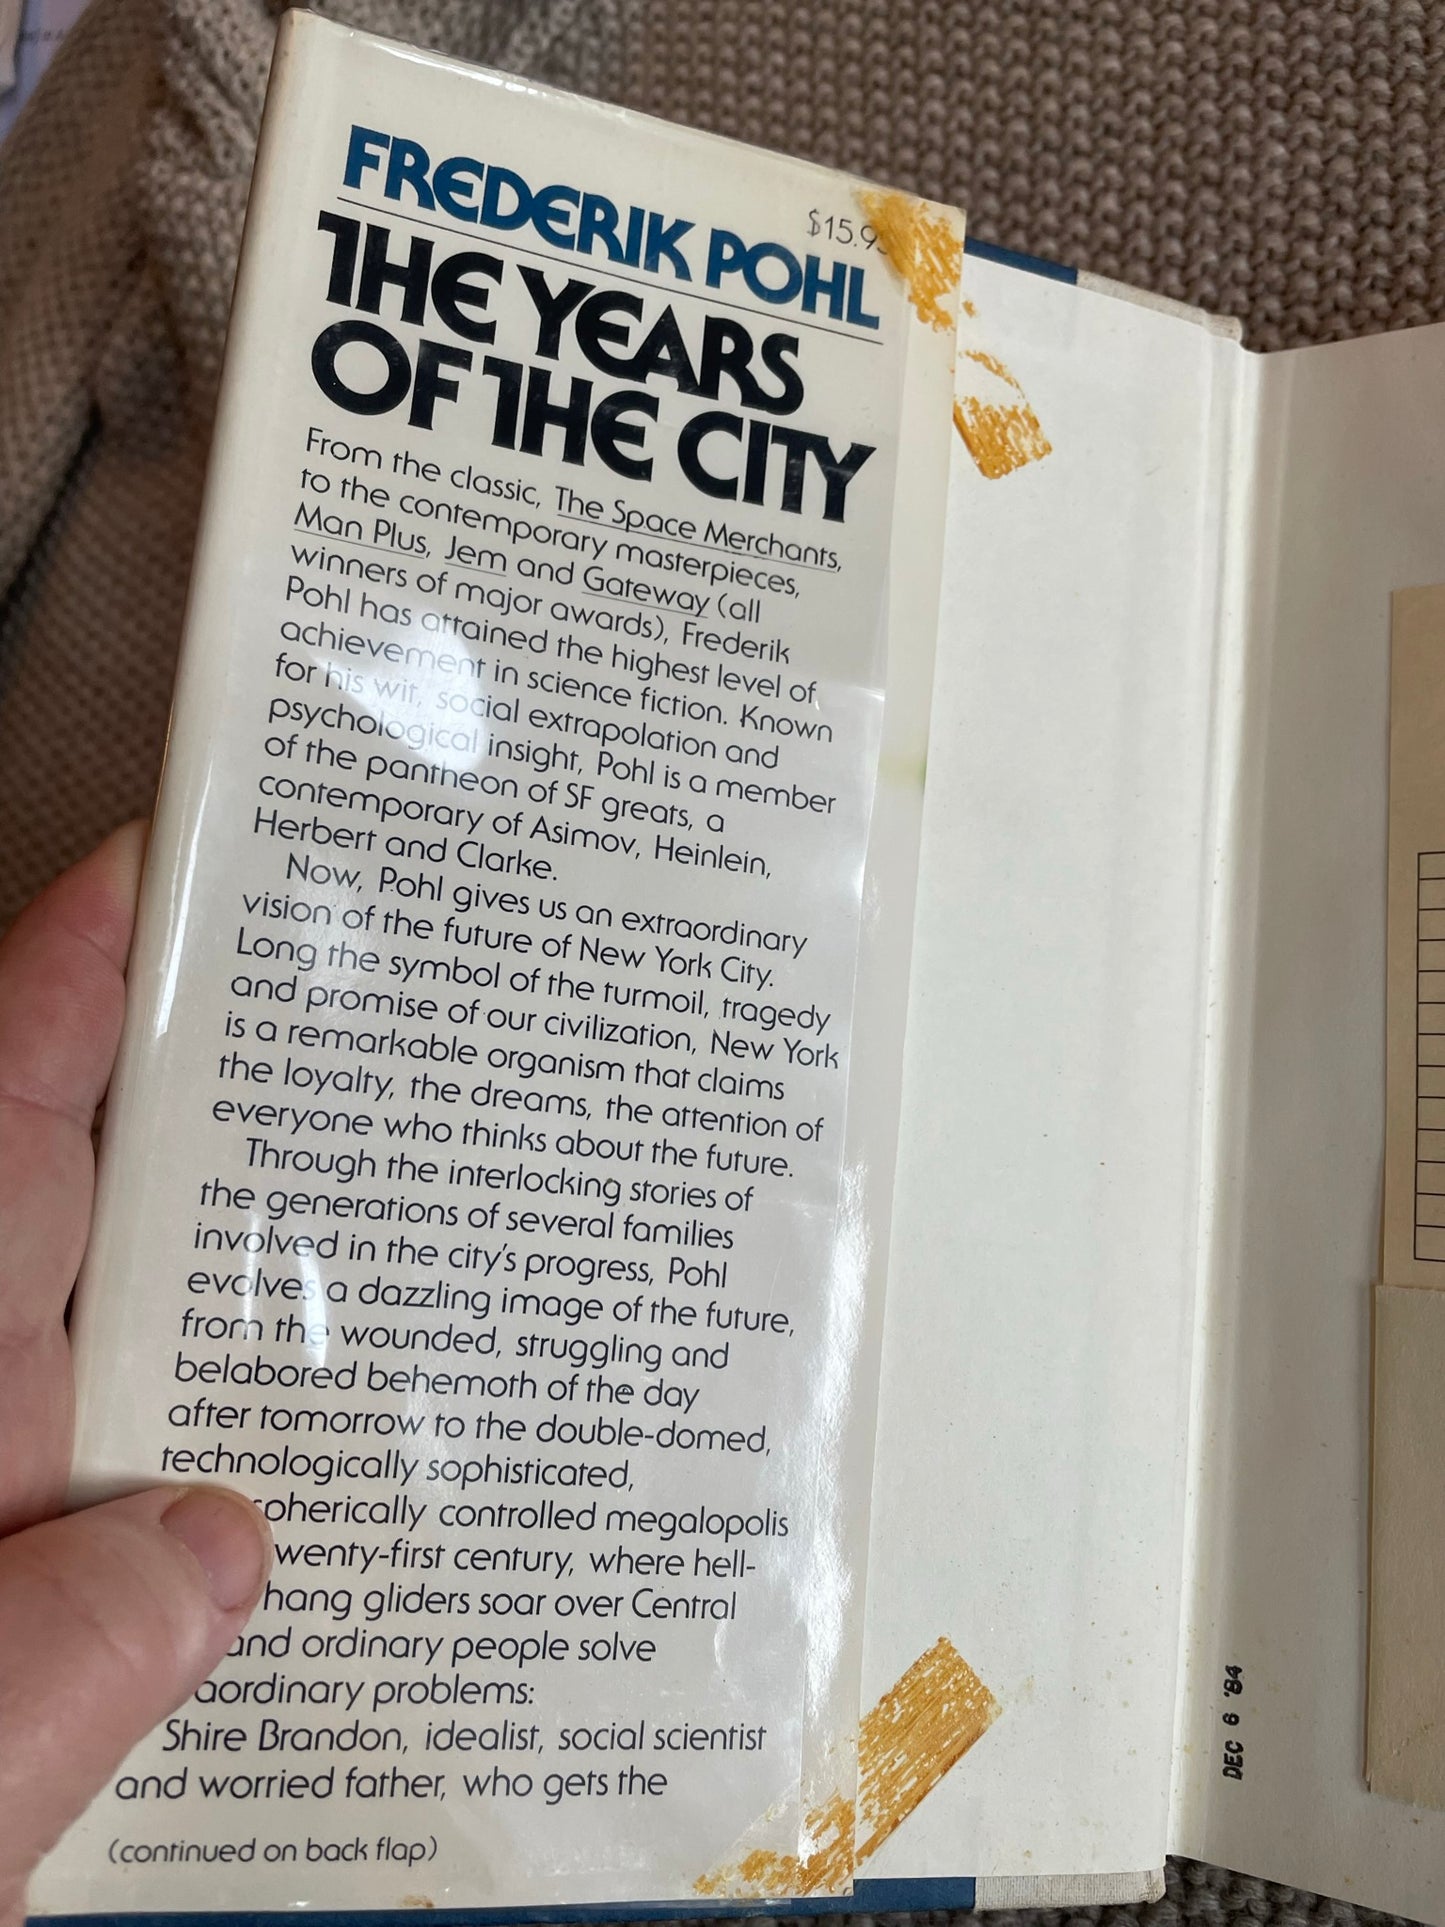 Pohl, Frederik: The Years of the City  (First Edition, 1984)